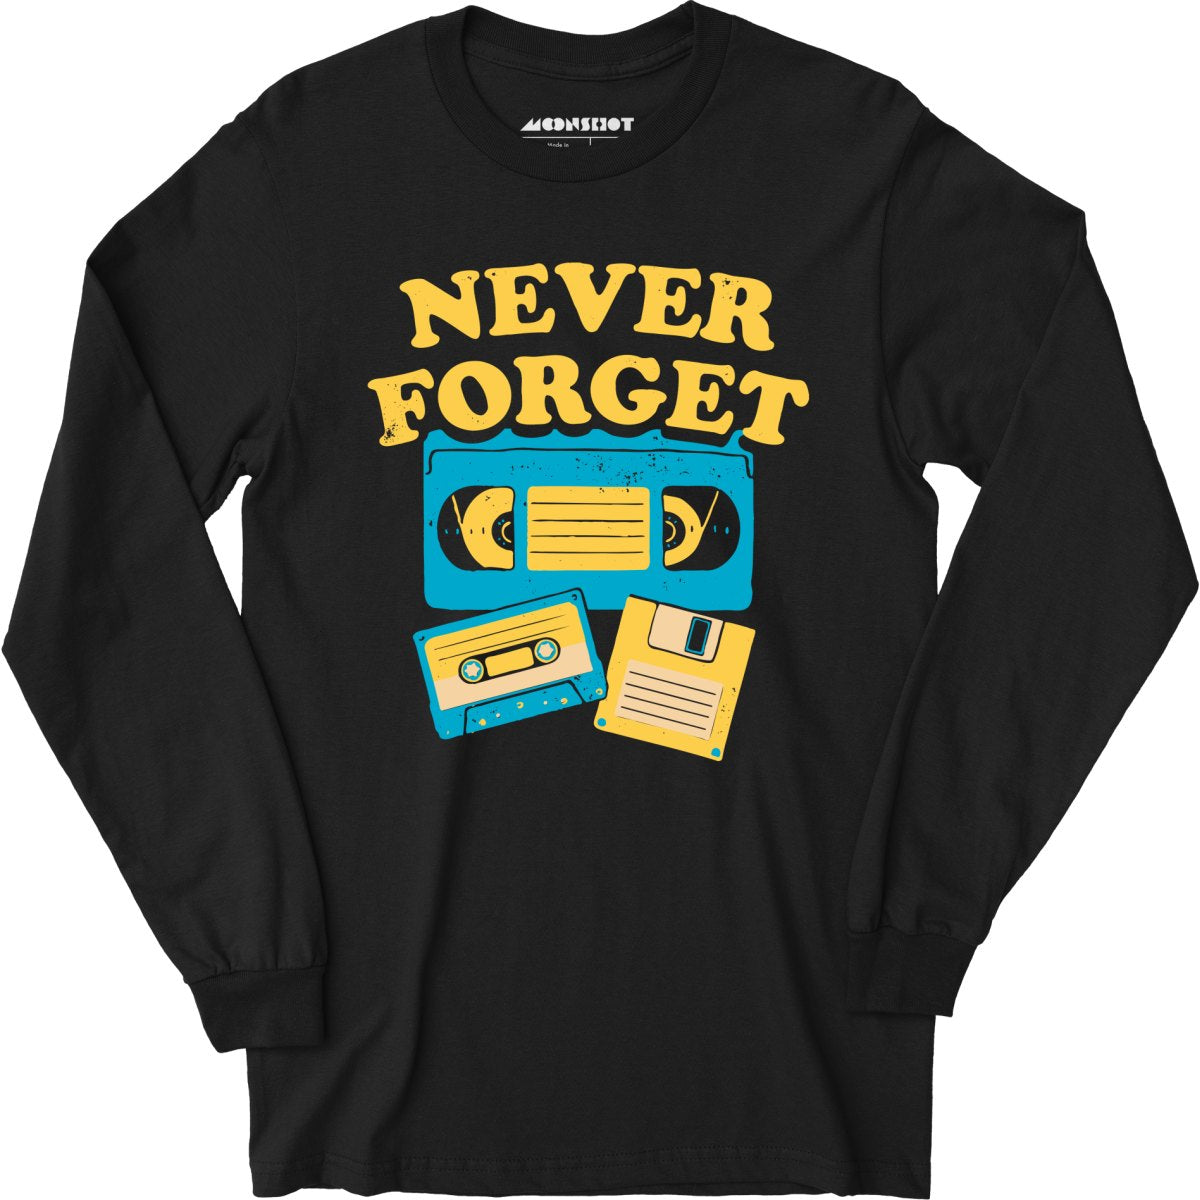 Never Forget - Long Sleeve T-Shirt